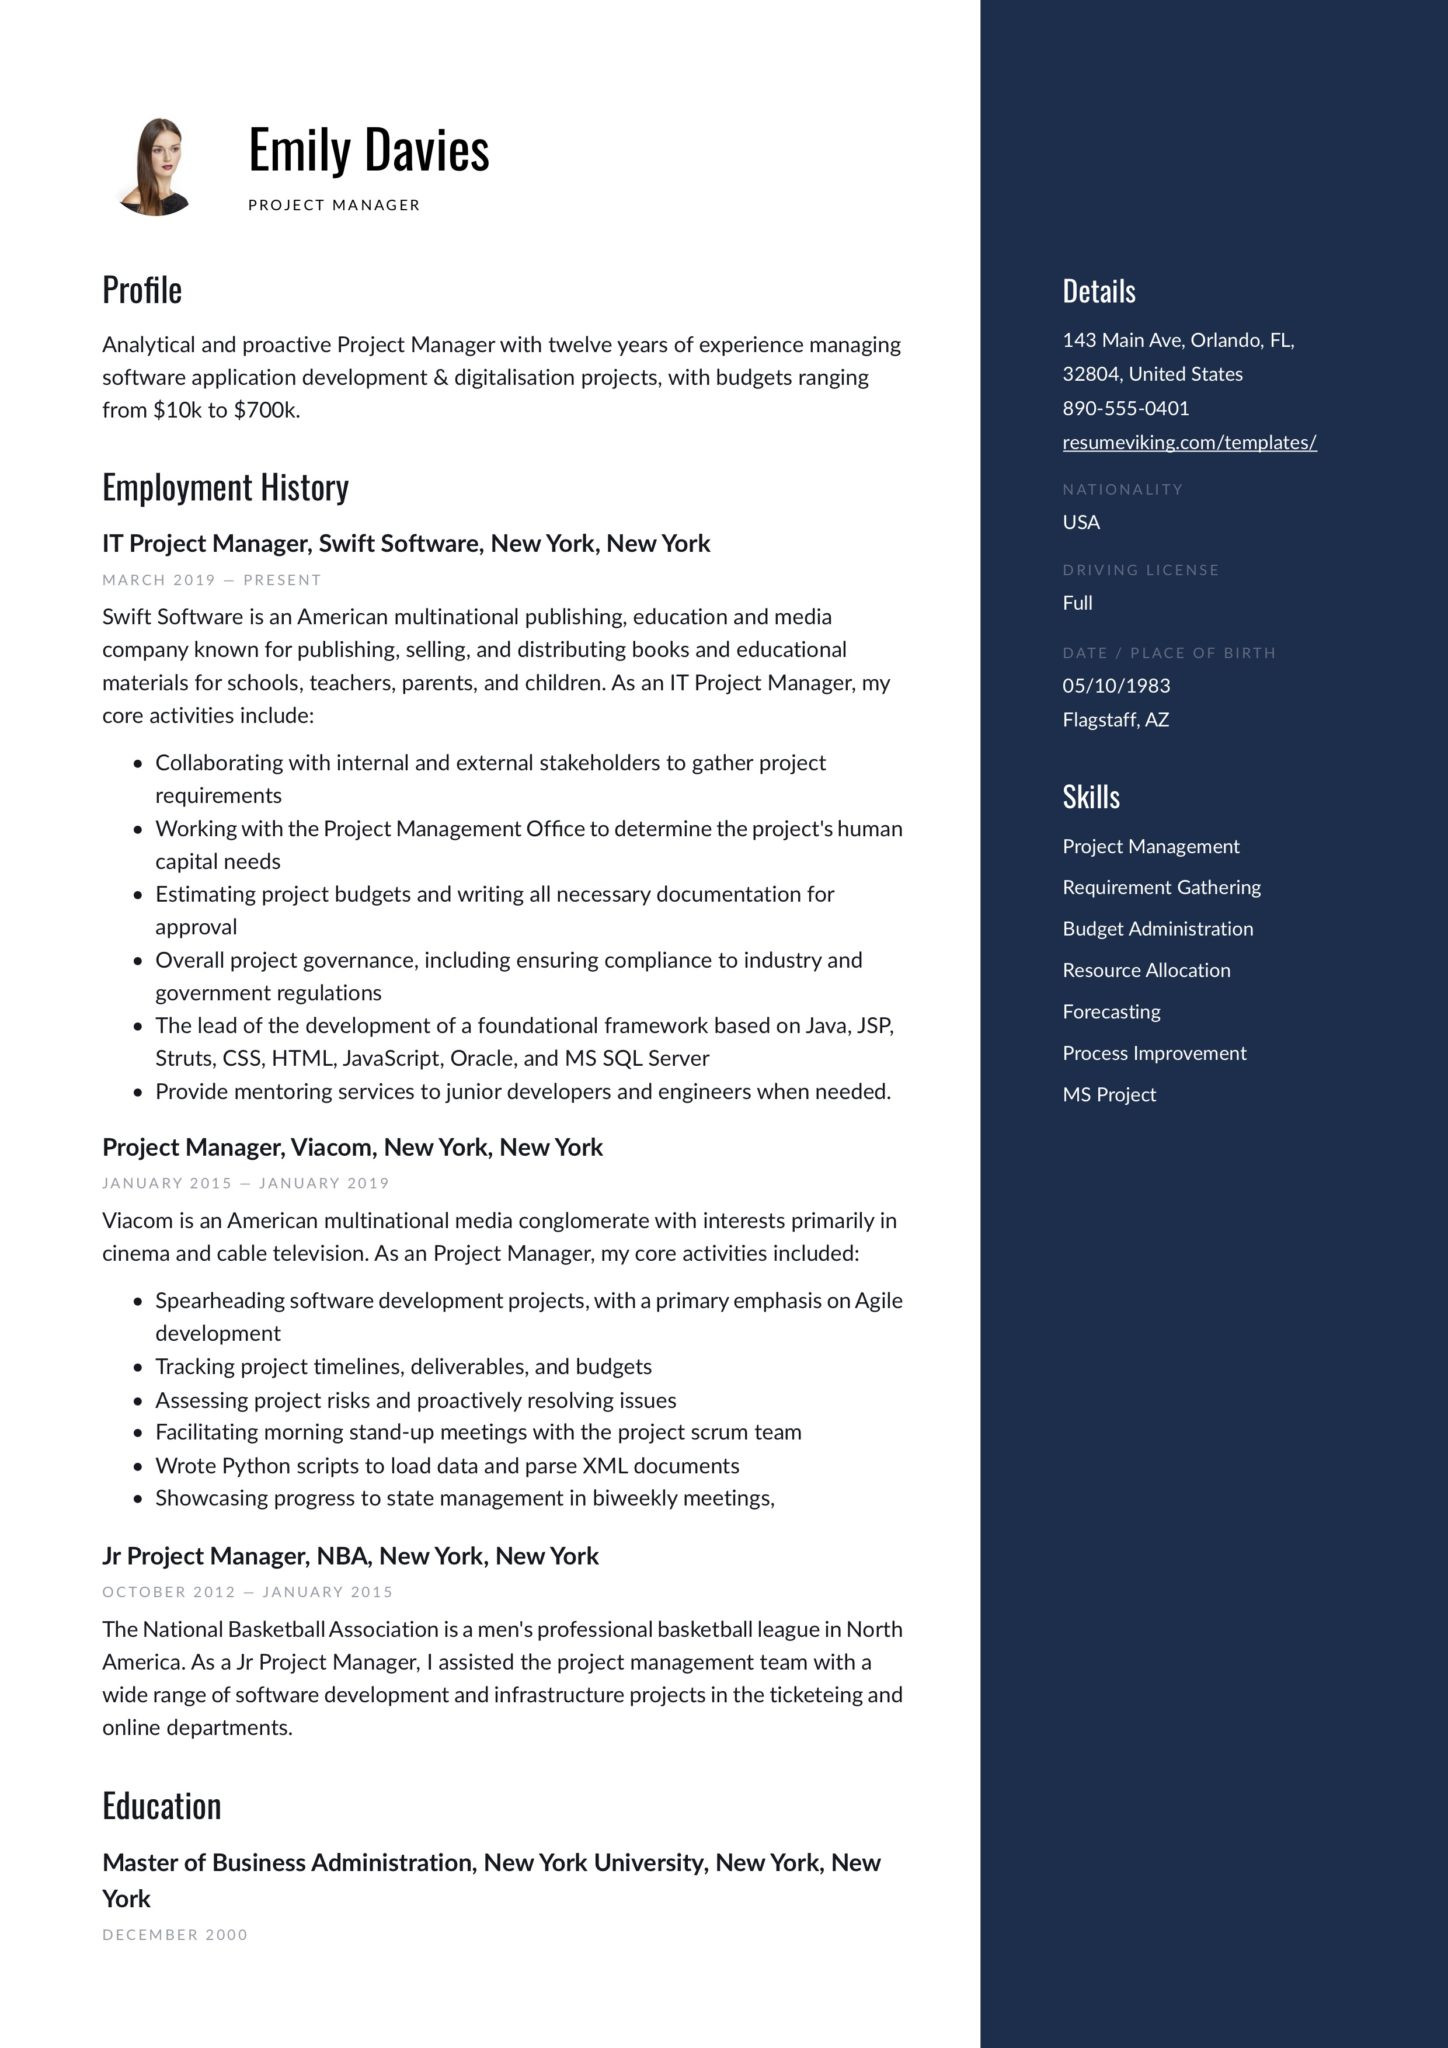 Free Sample Of Project Manager Resume 20 Project Manager Resume Examples & Full Guide Pdf & Word 2021